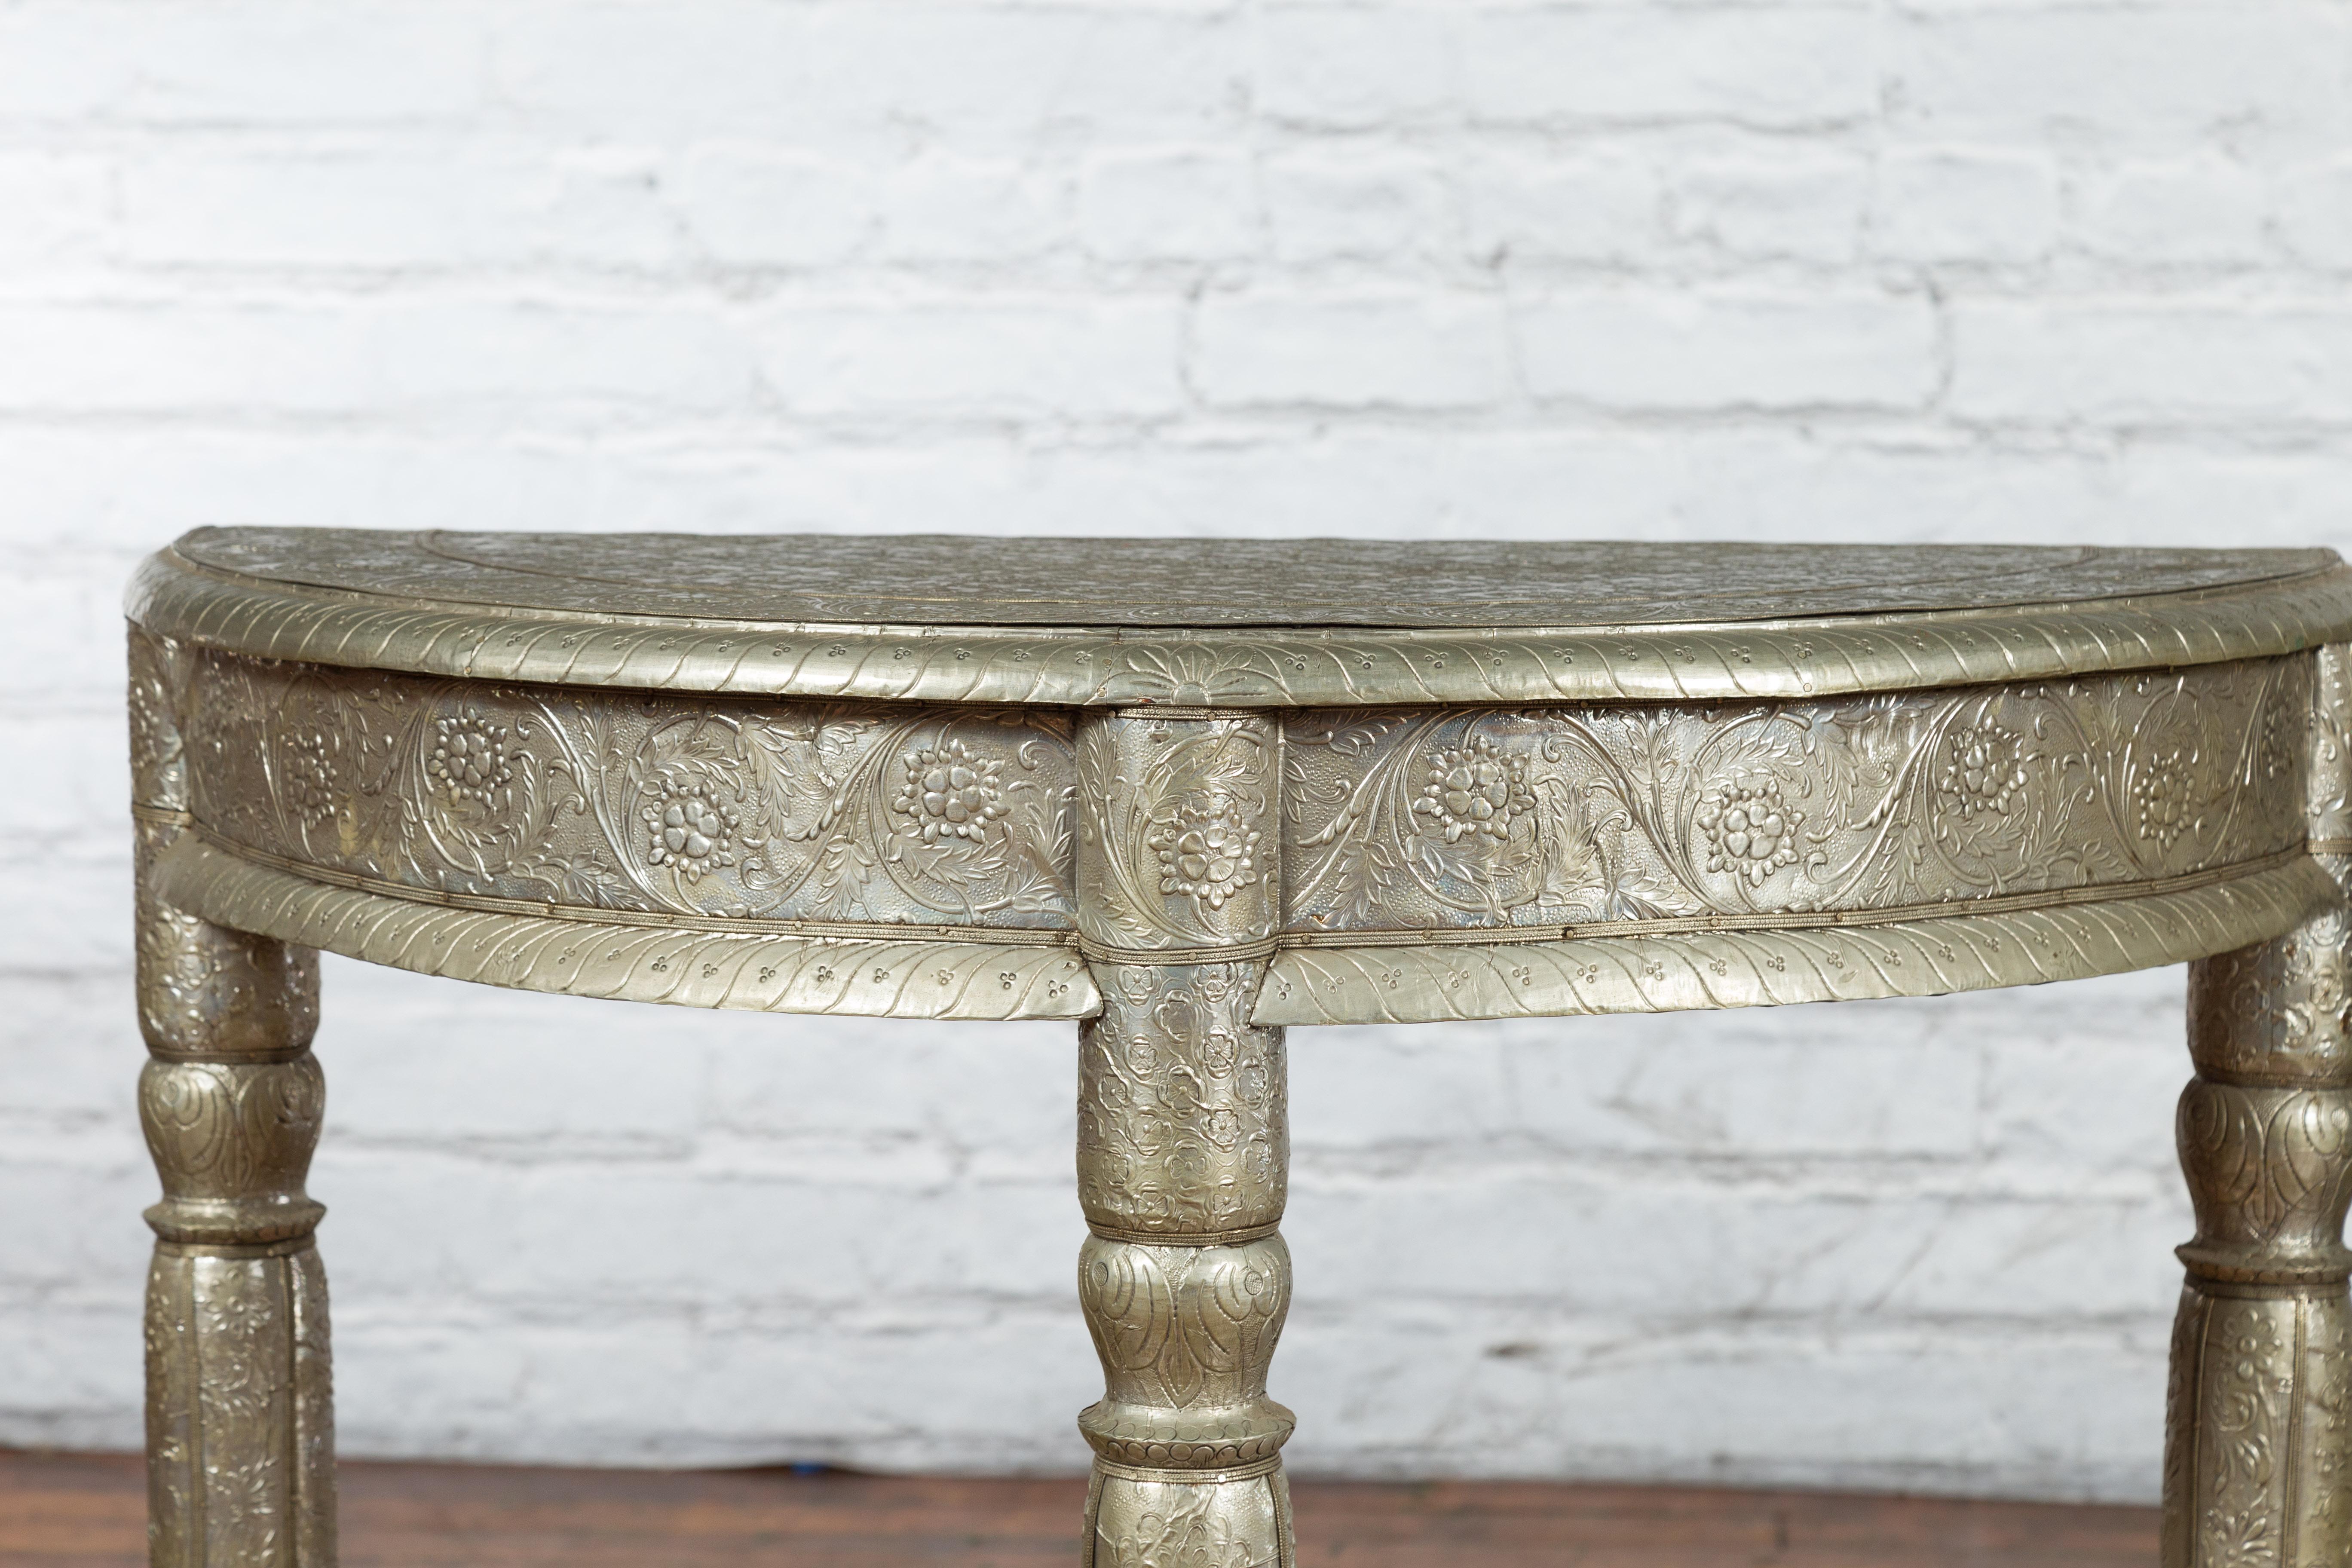 Pair of Indian Metal Sheathing Repoussé Demilune Tables with Floral Arabesques For Sale 1